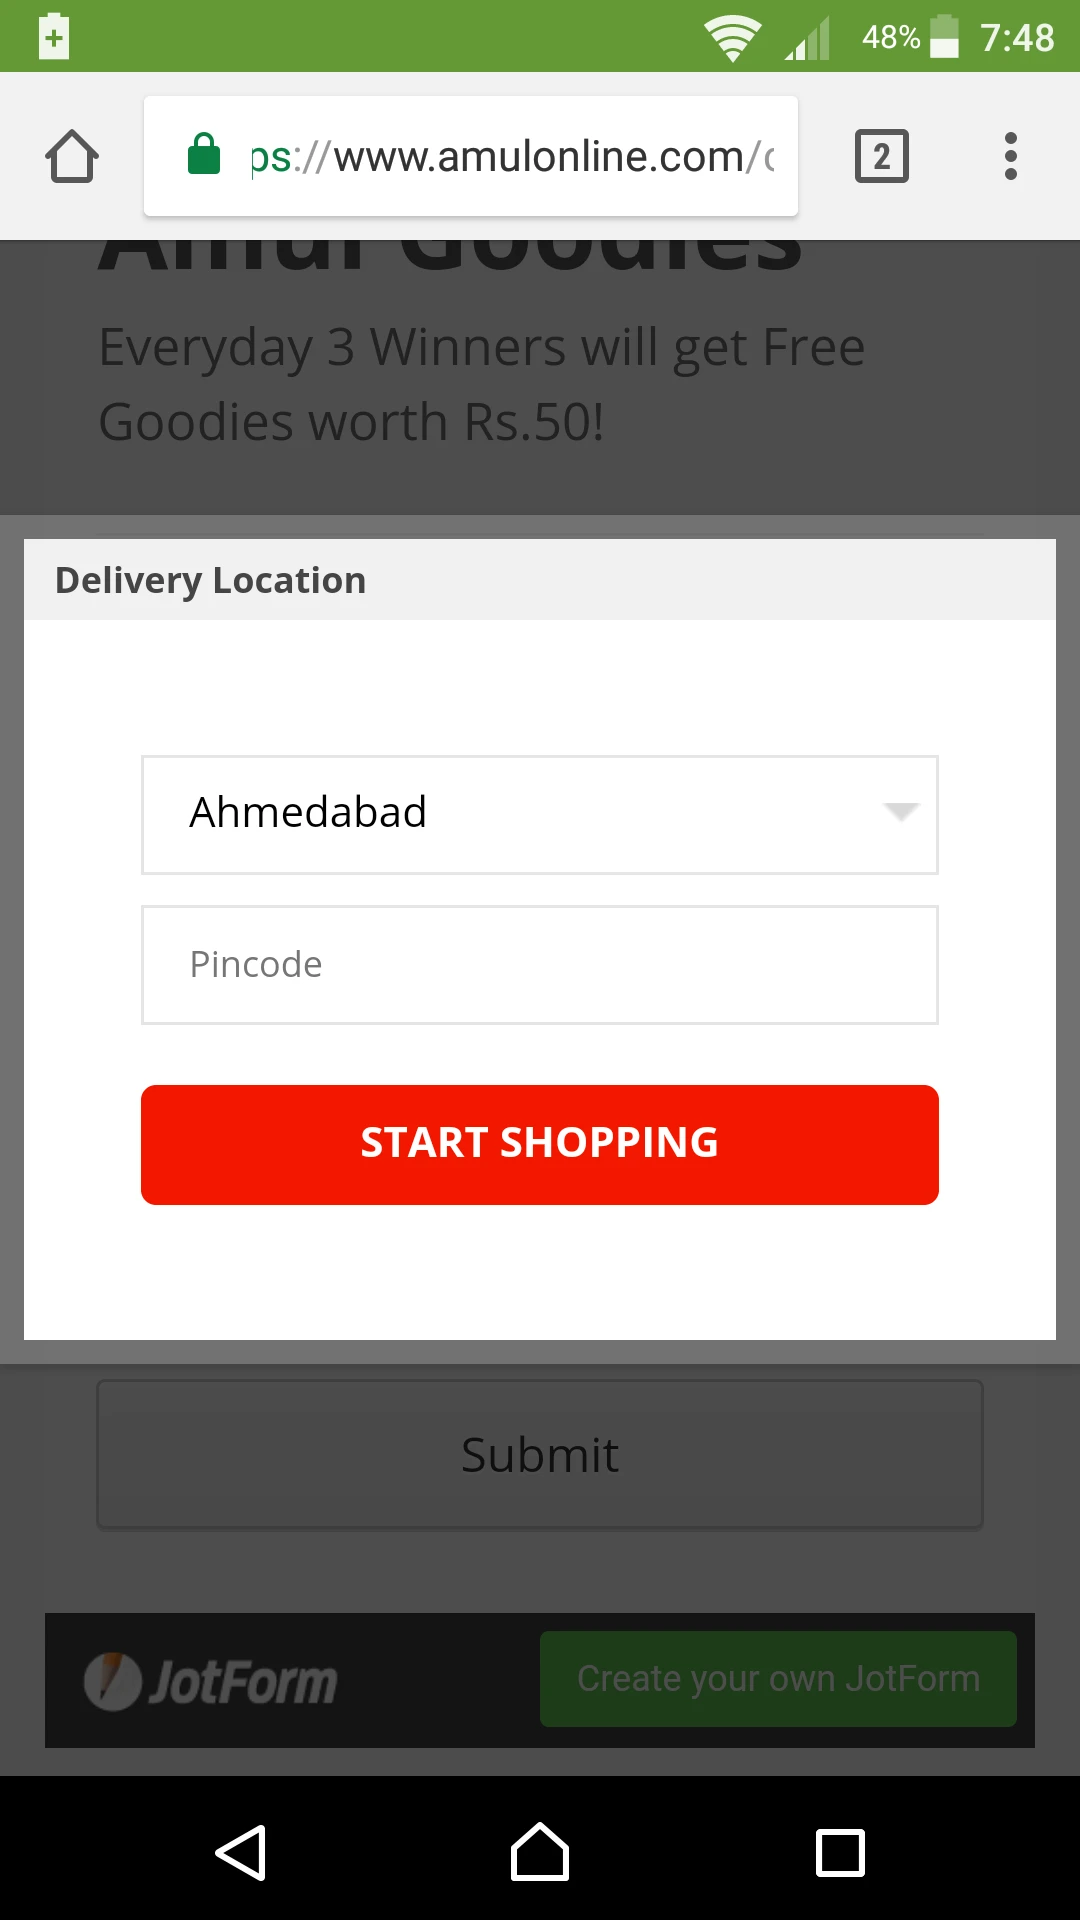 The Submit button is missing on Android devices when form is embedded Image 1 Screenshot 20